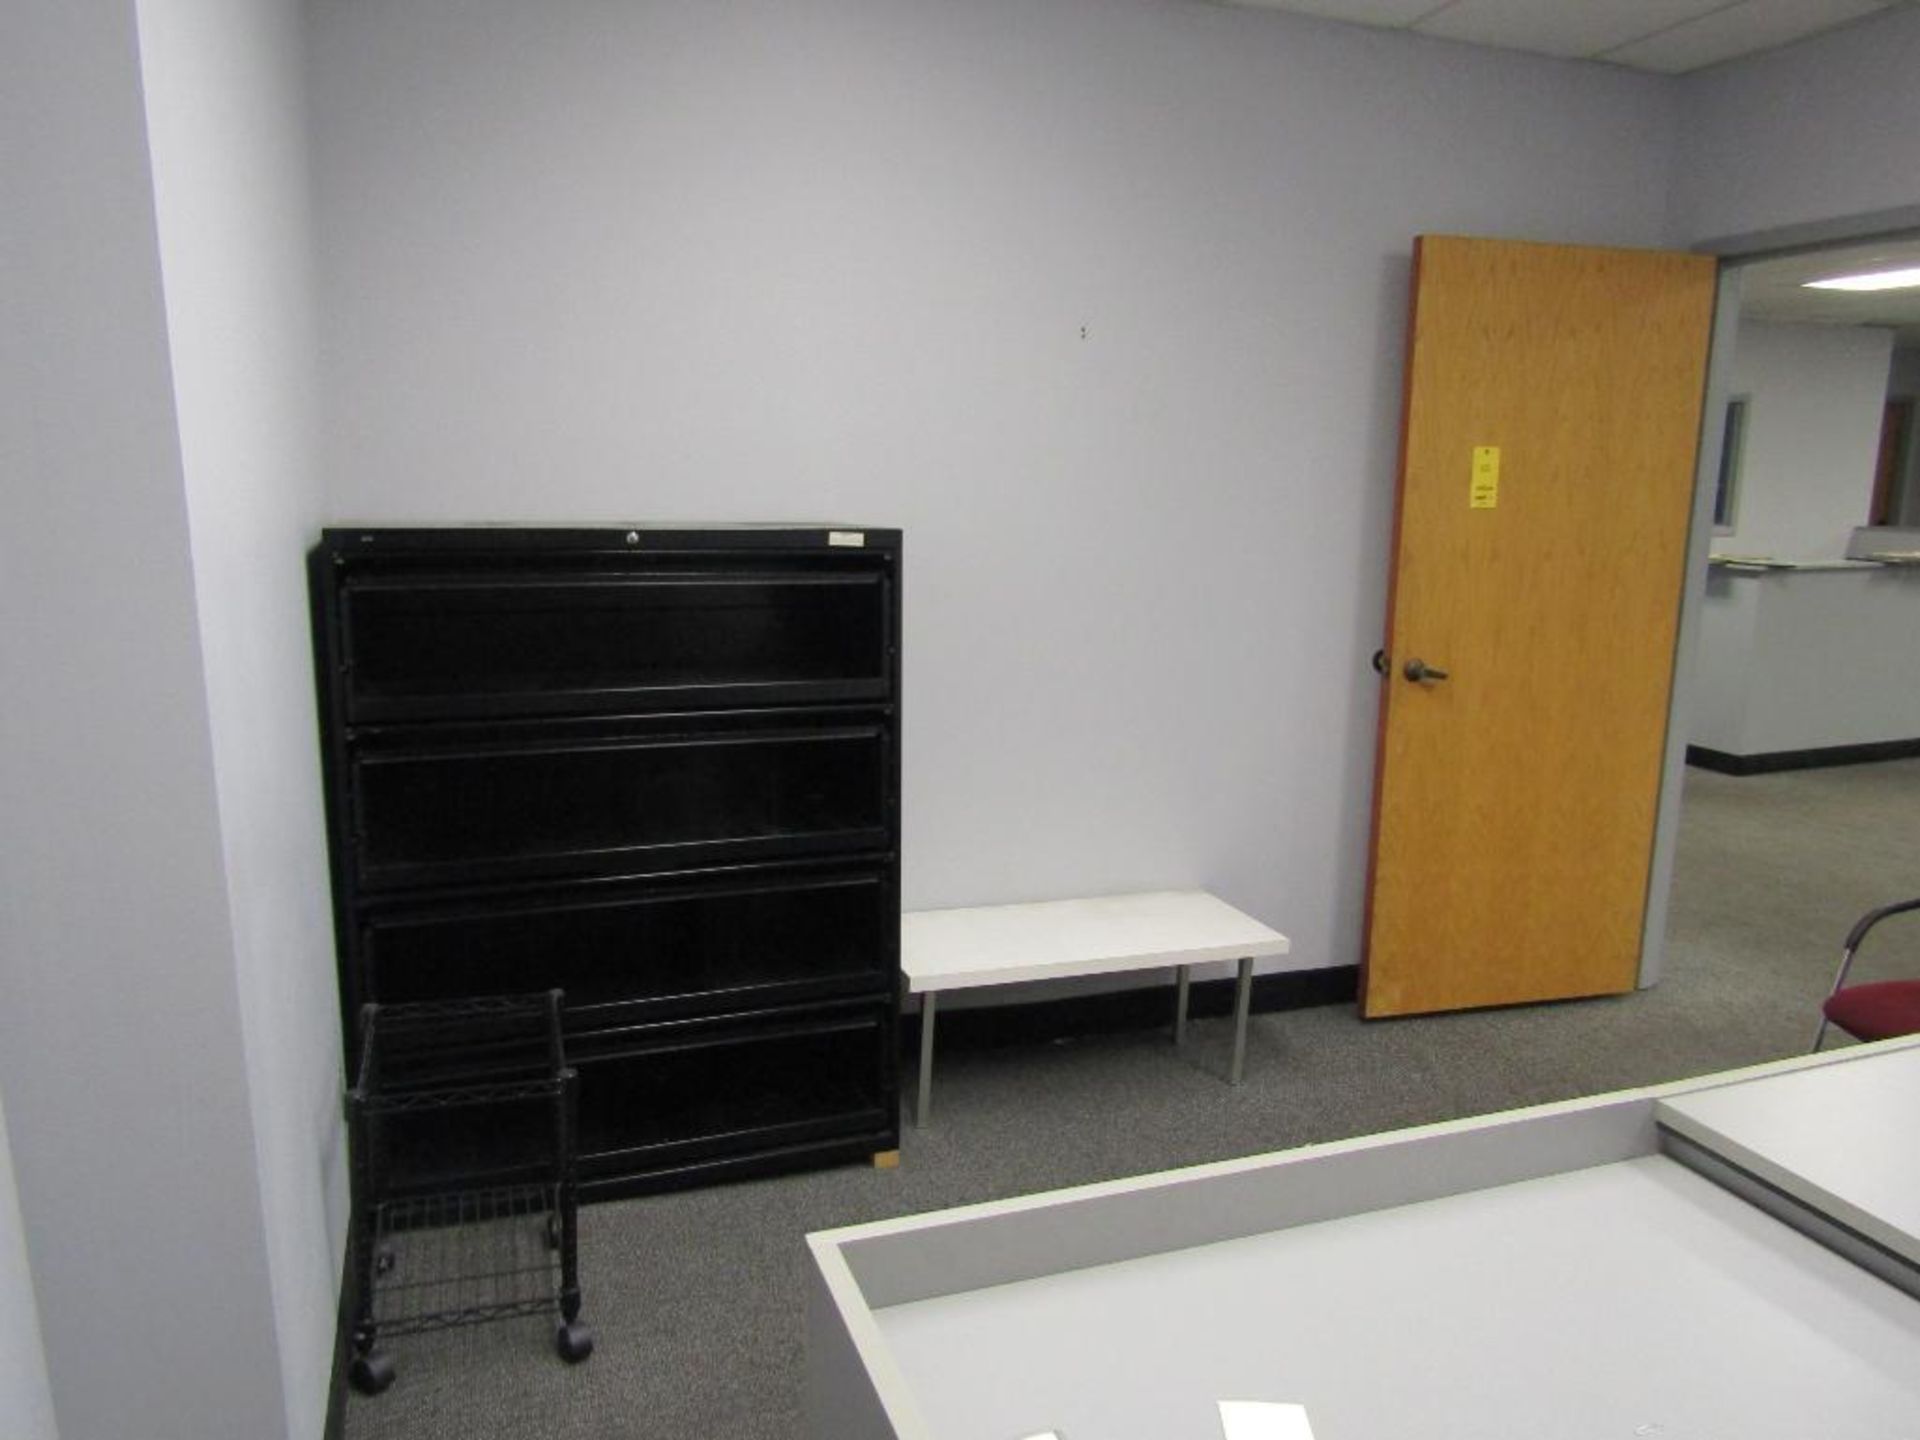 Office Desk, Chair, File Cabinets - Image 2 of 10